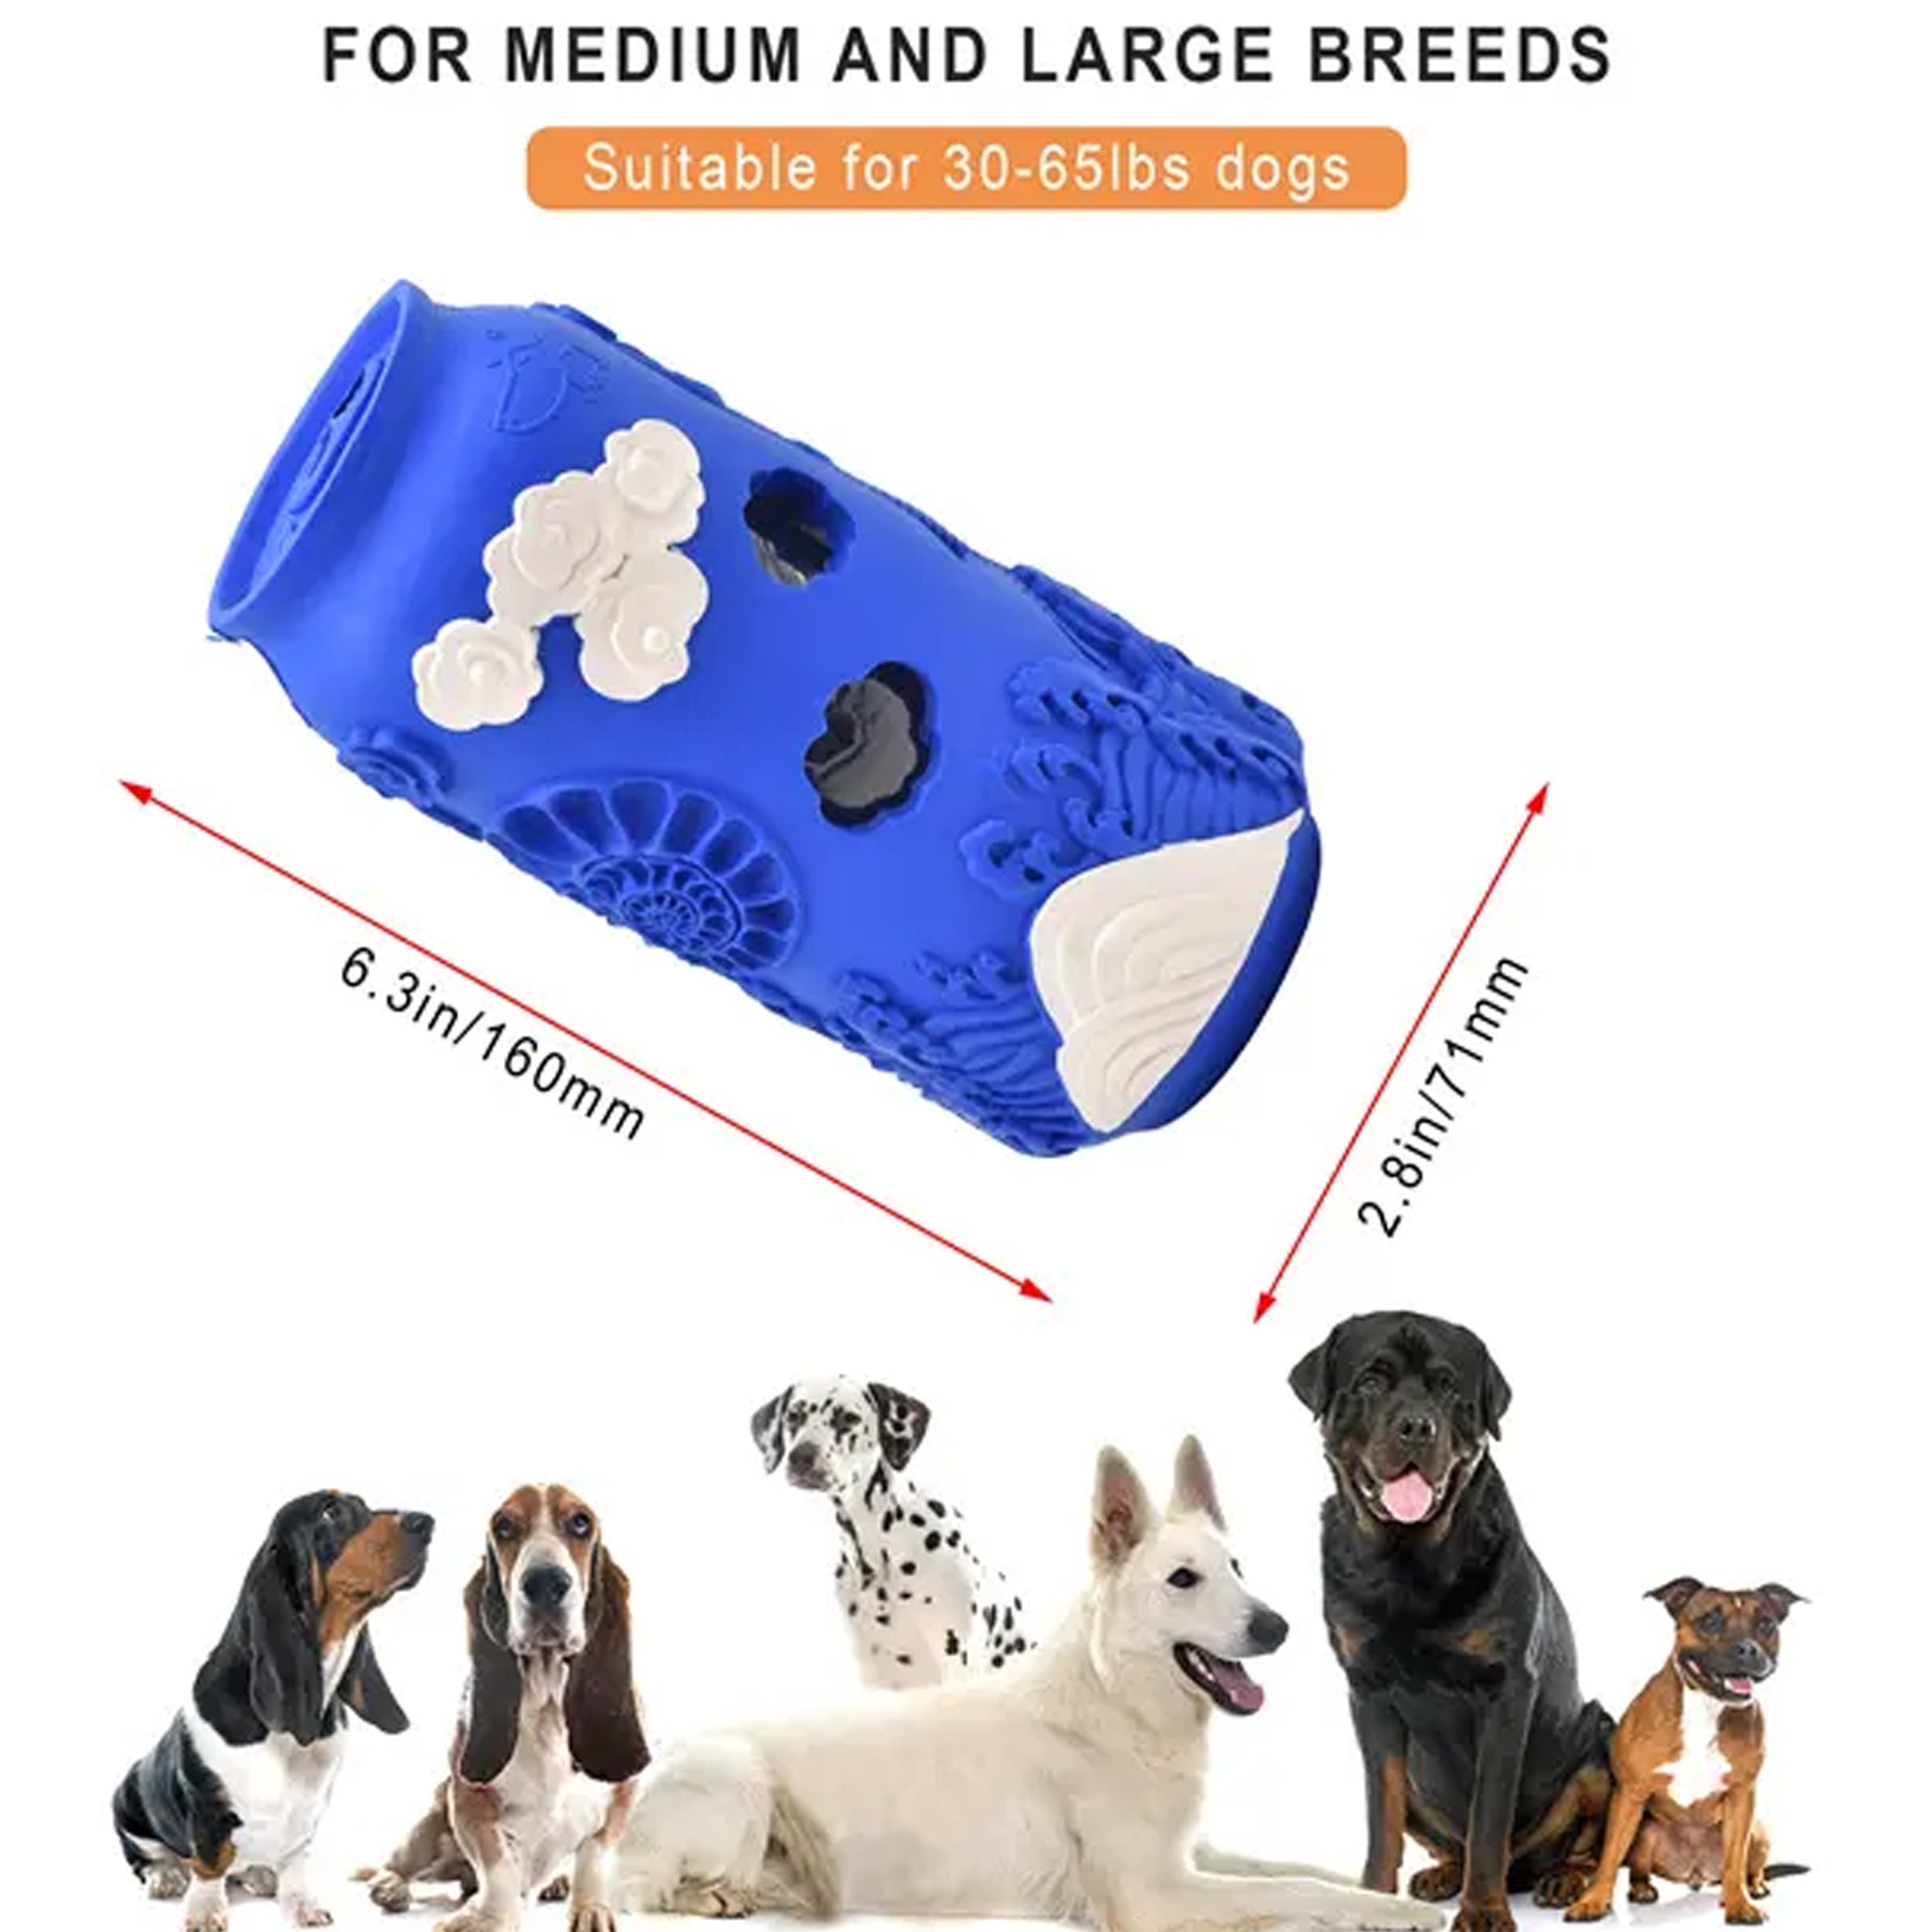 Big, Small Dog Teeth Clean Interactive Can Shape Toy - Keep Your Pet's Teeth Clean and Healthy